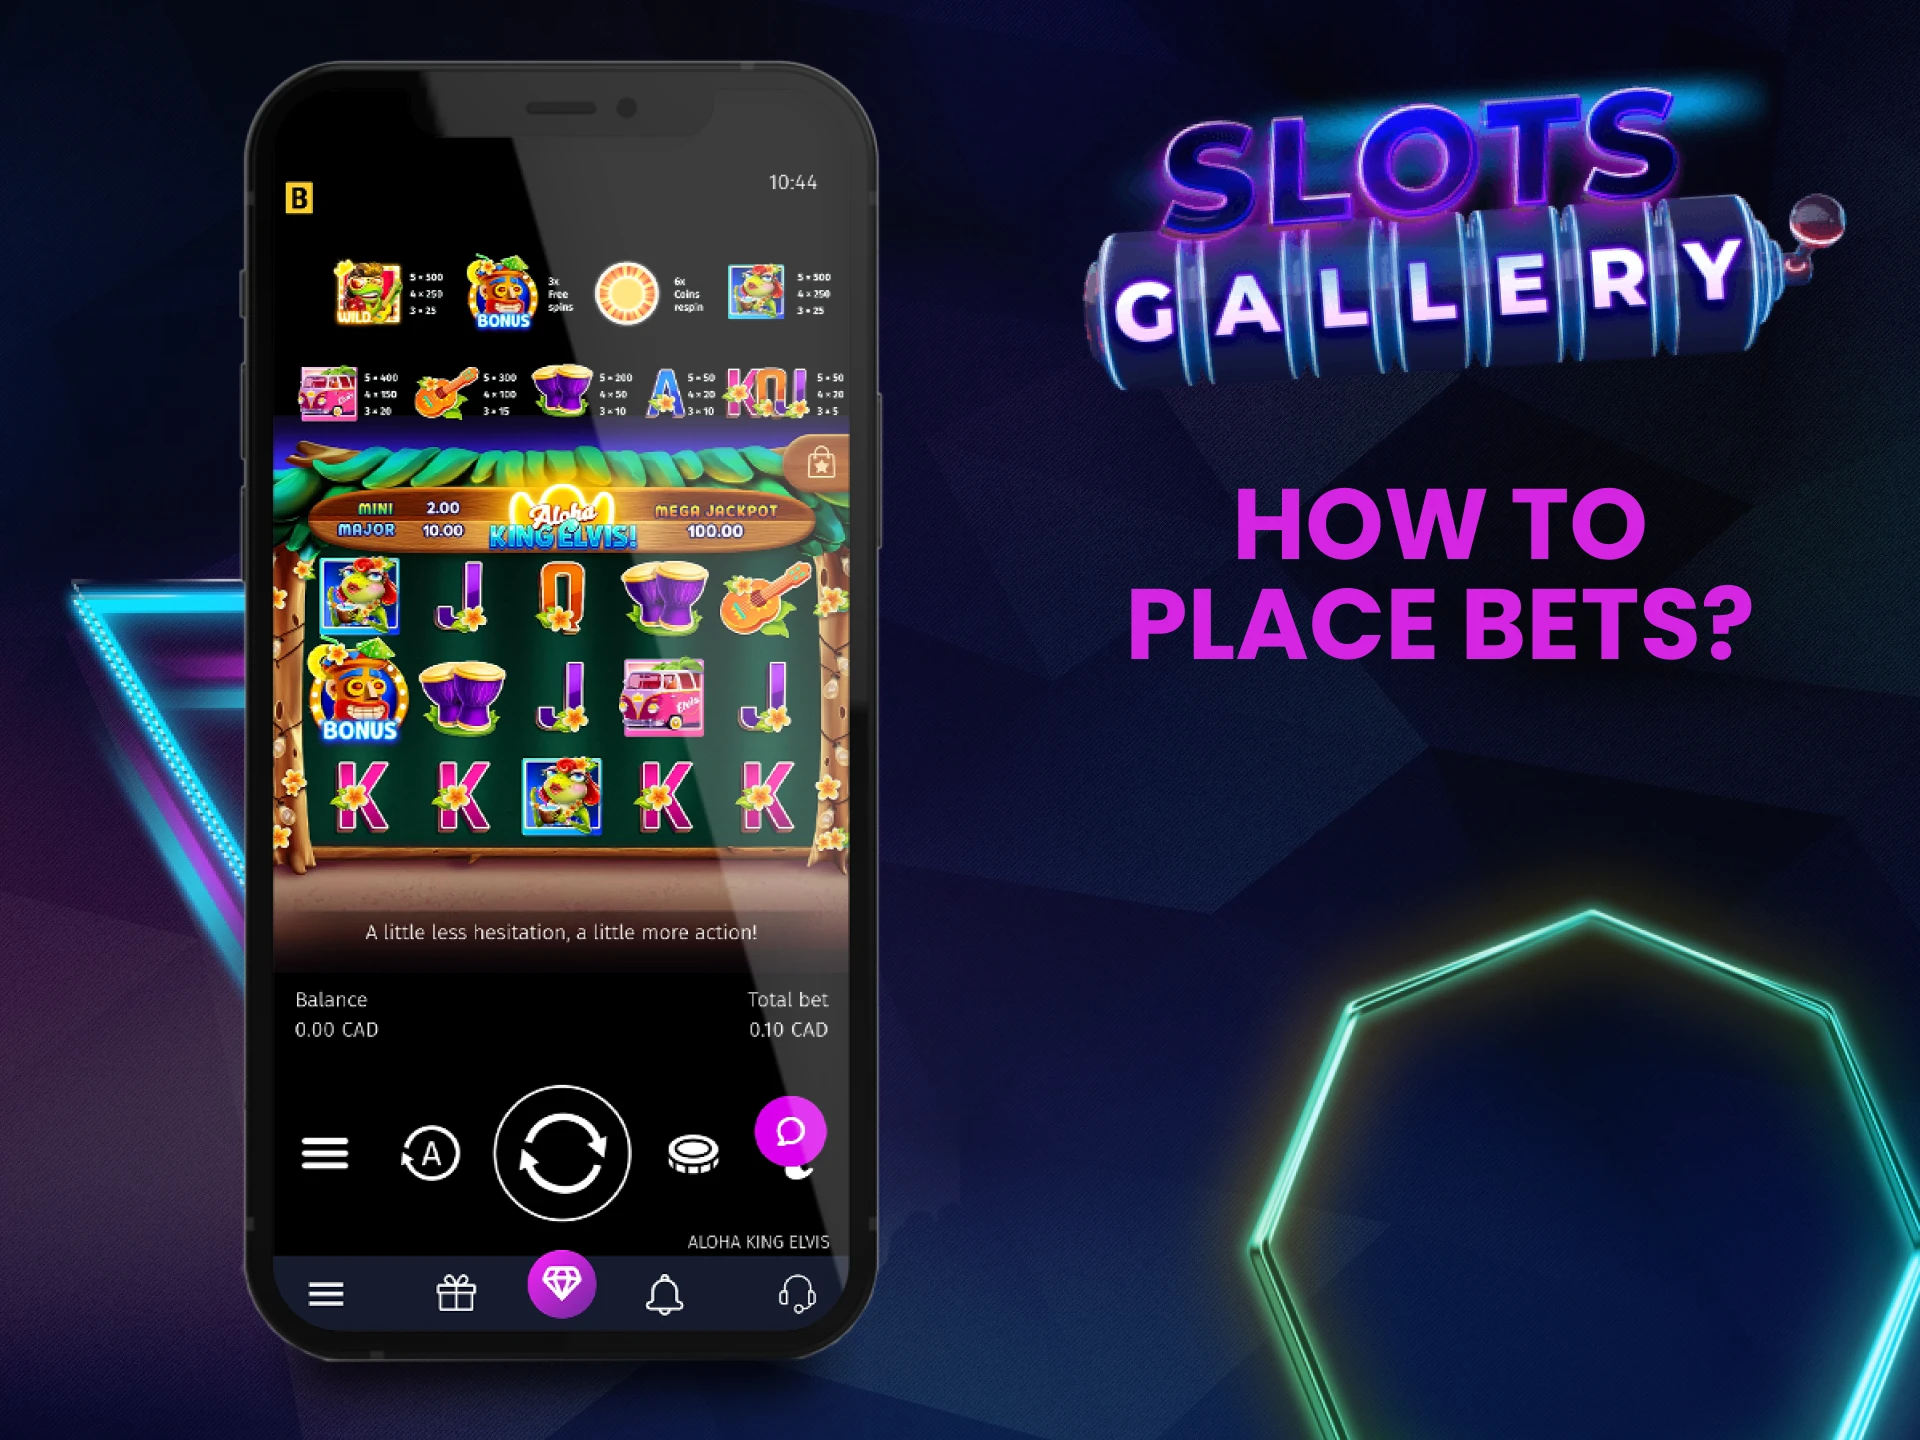 We will tell you how to start playing games in the SlotsGallery application.